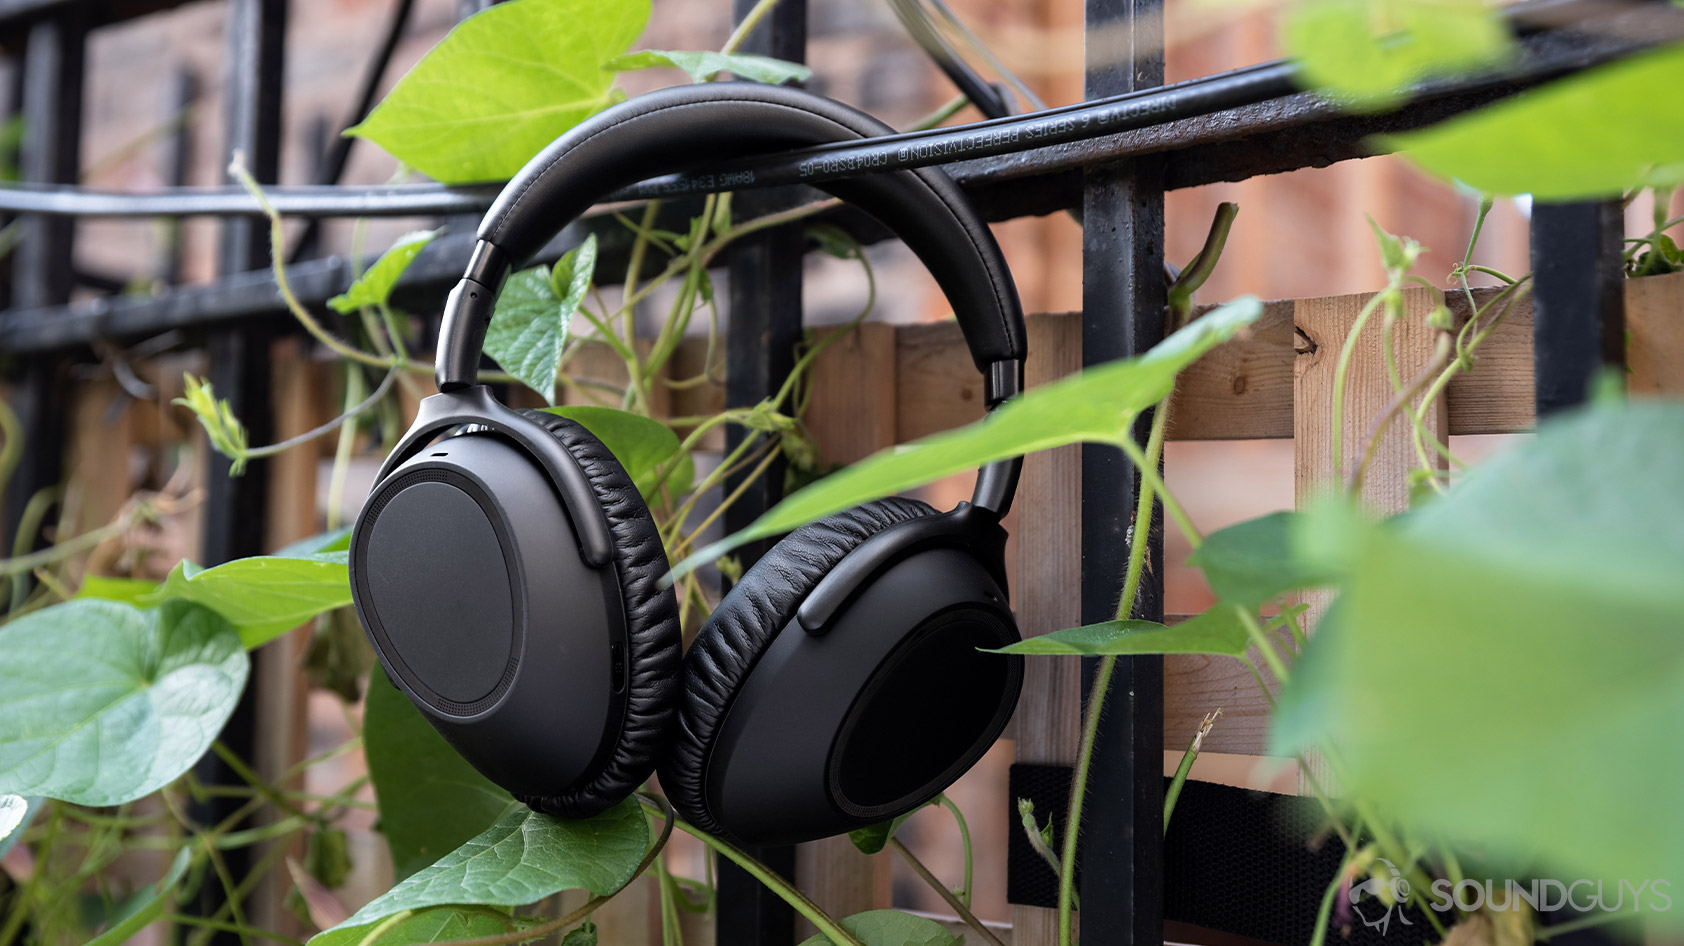 A photo of the Sennheiser PXC 550-II noise canceling headphones hanging in front of a fence and plants.